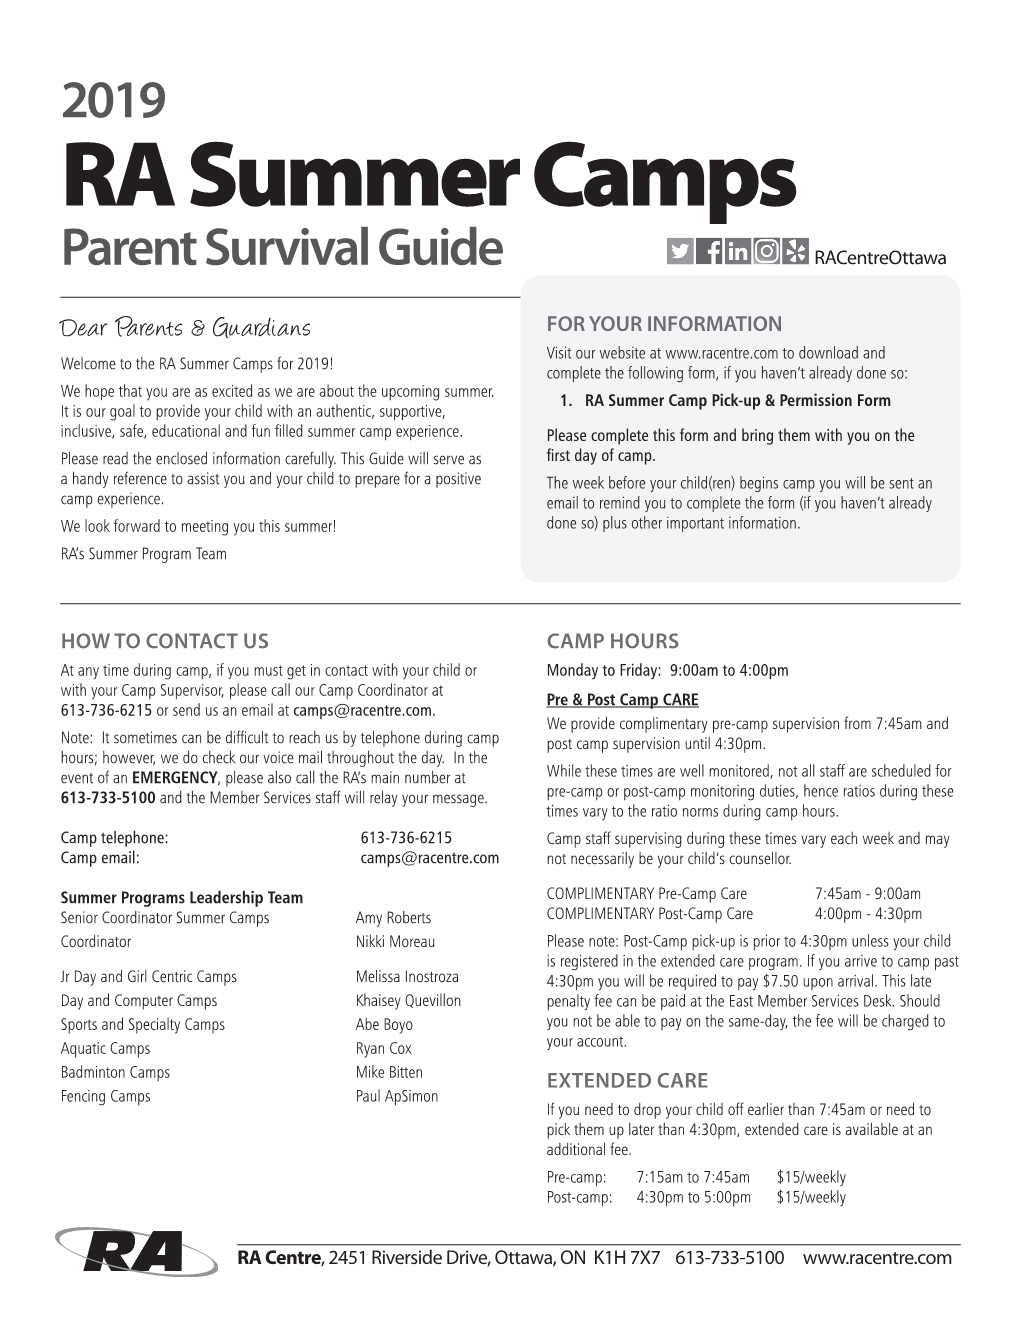 RA Summer Camps Parent Survival Guide Racentreottawa